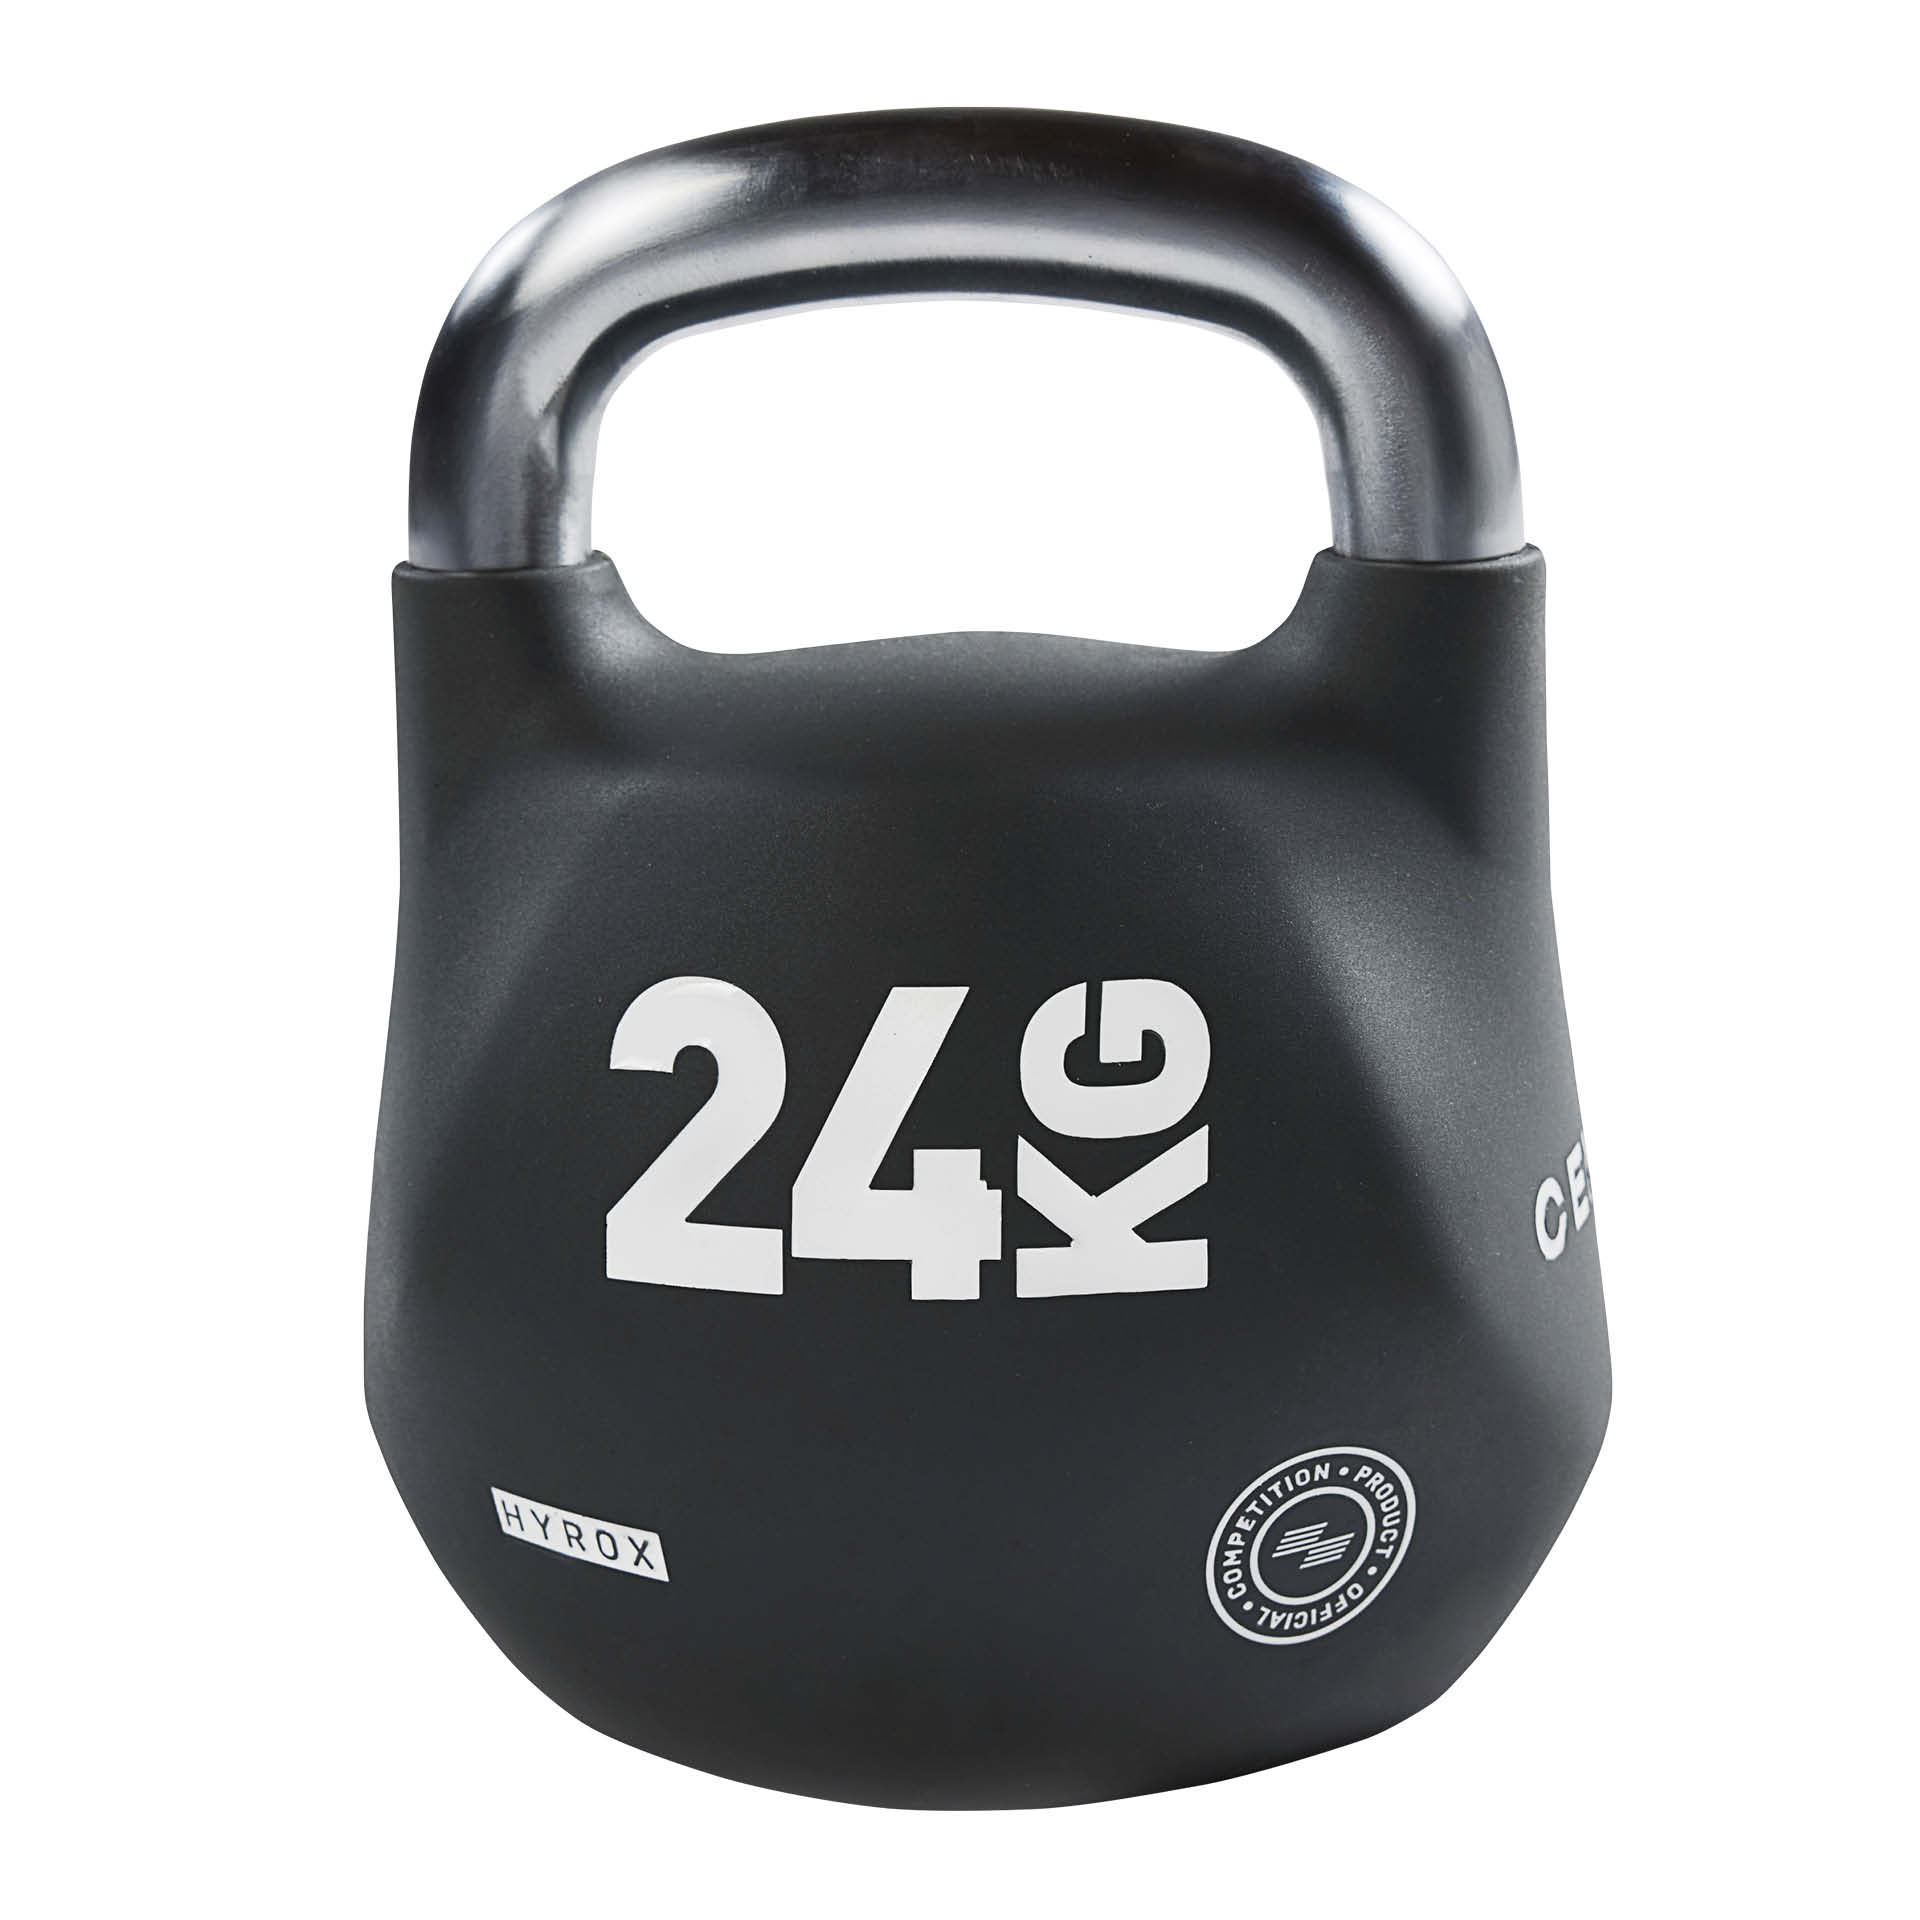 CENTR x HYROX Competition Octo Kettlebell